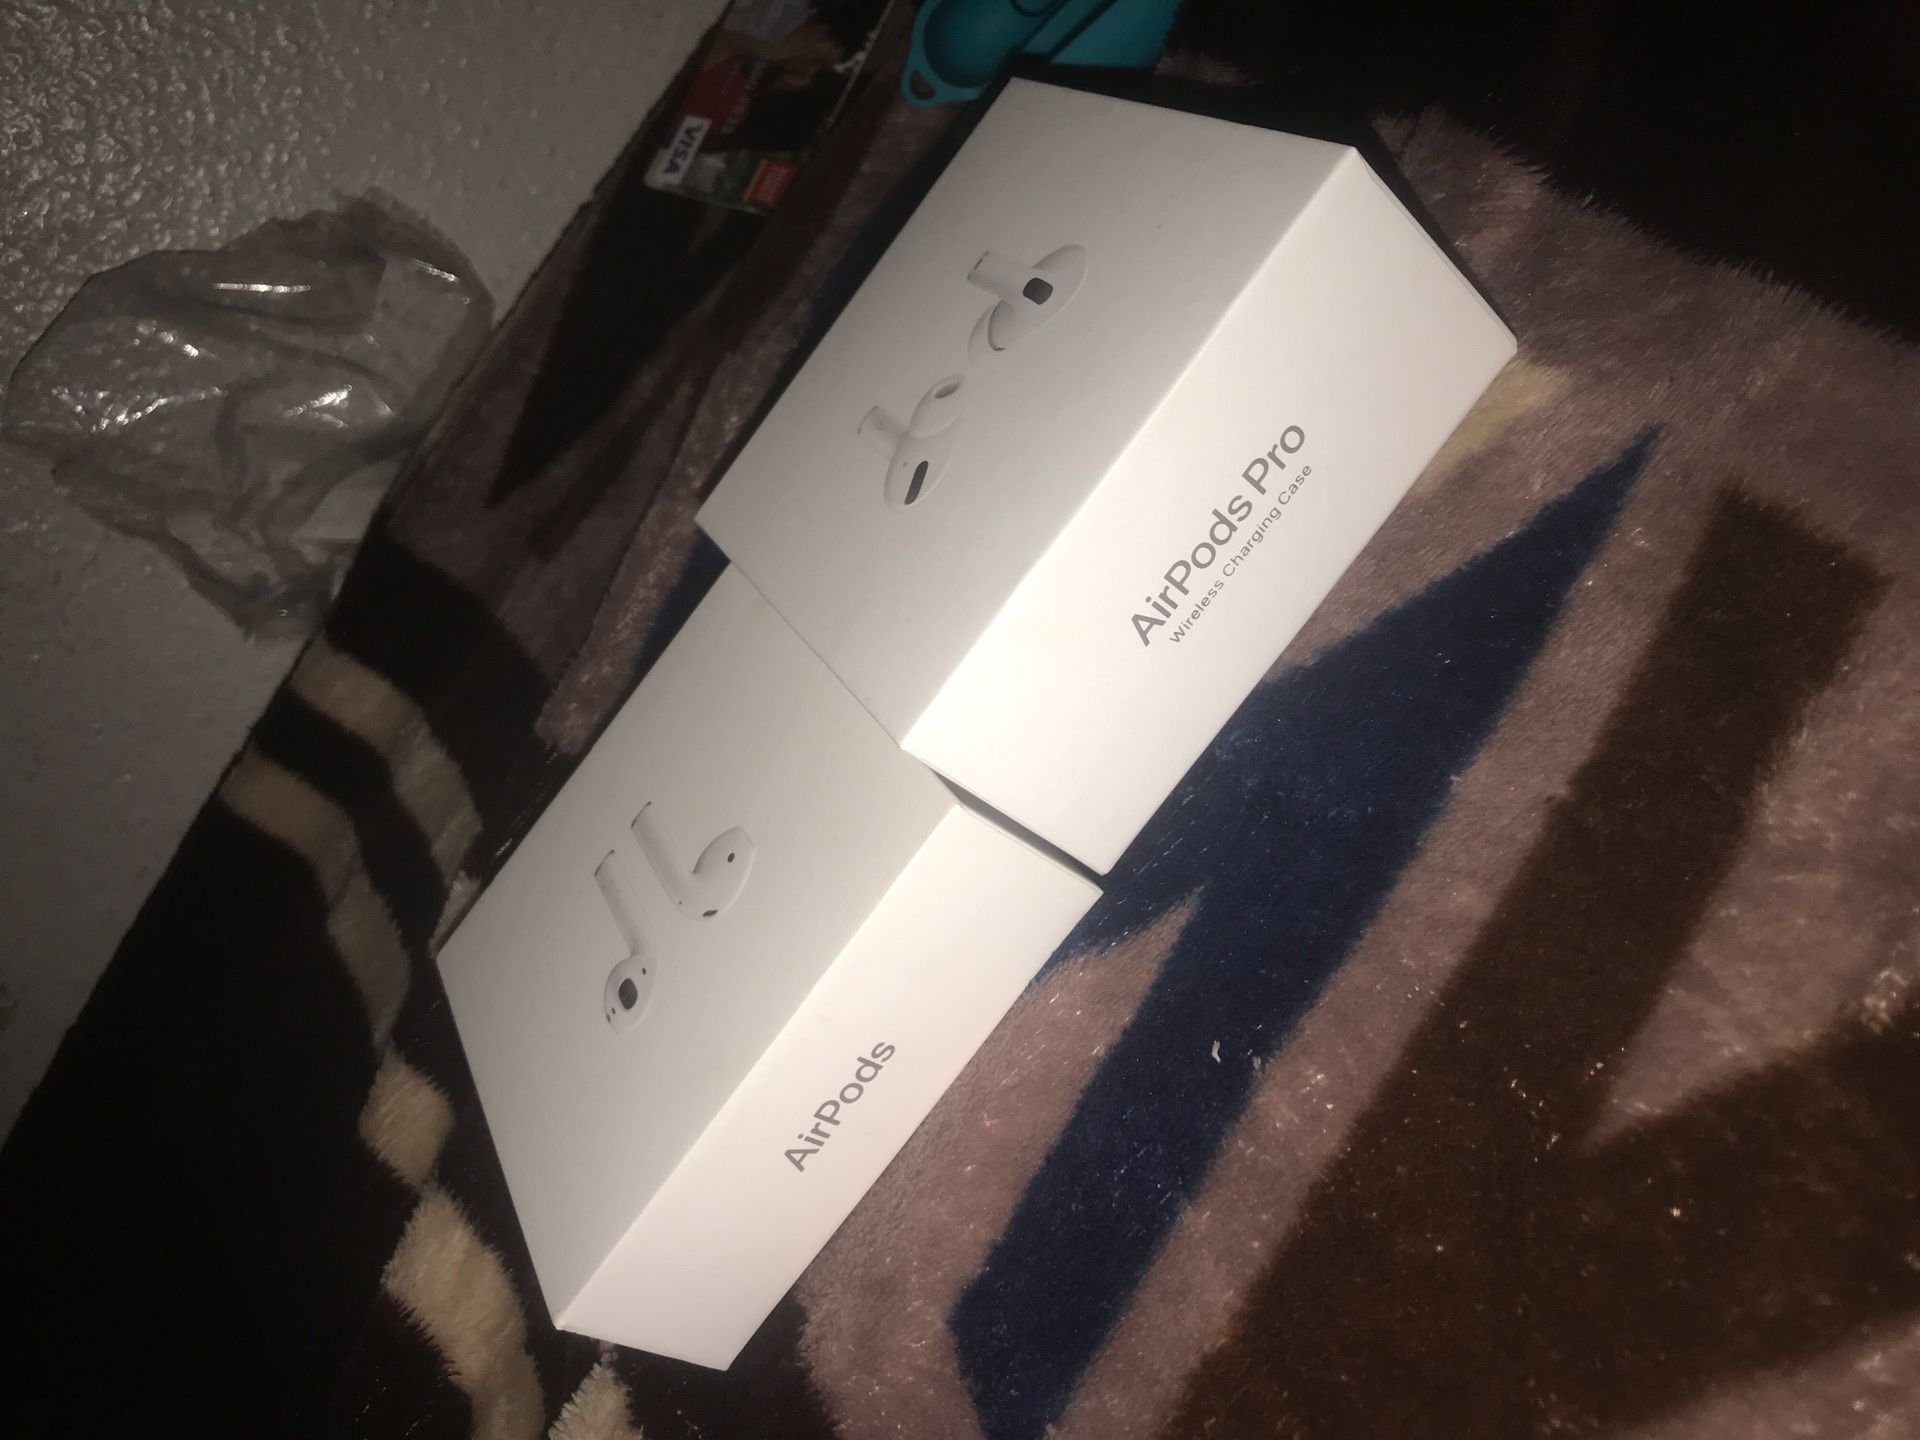 AirPods Pro and AirPods 2gen $200 for both